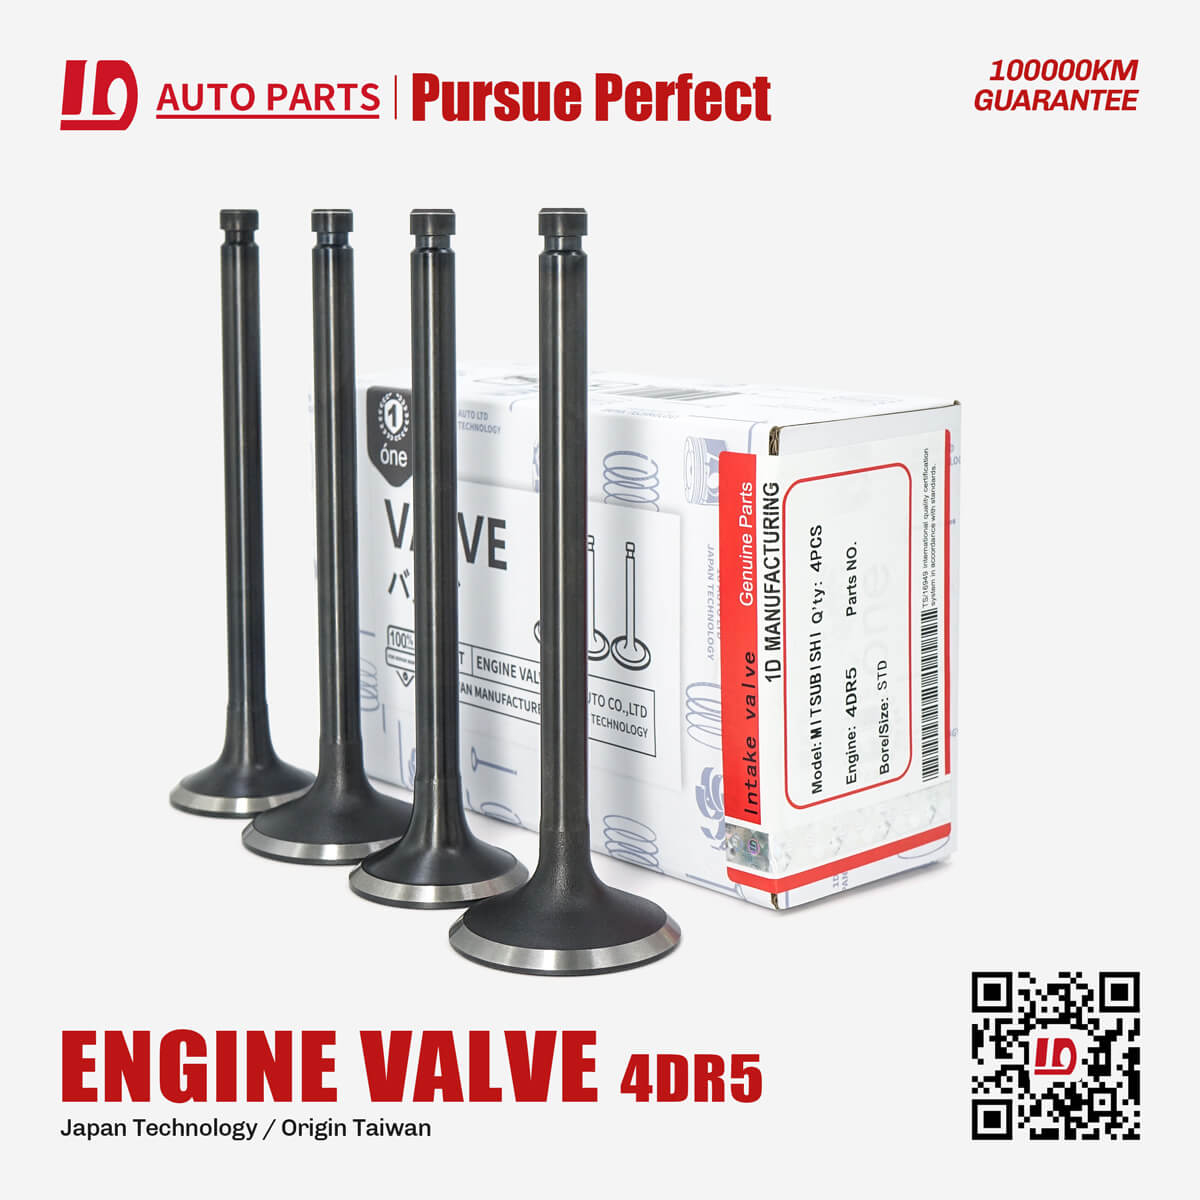 Engine valves 31304-00100 intake and 31304-00101 exhaust valves For engine valve 4DR5